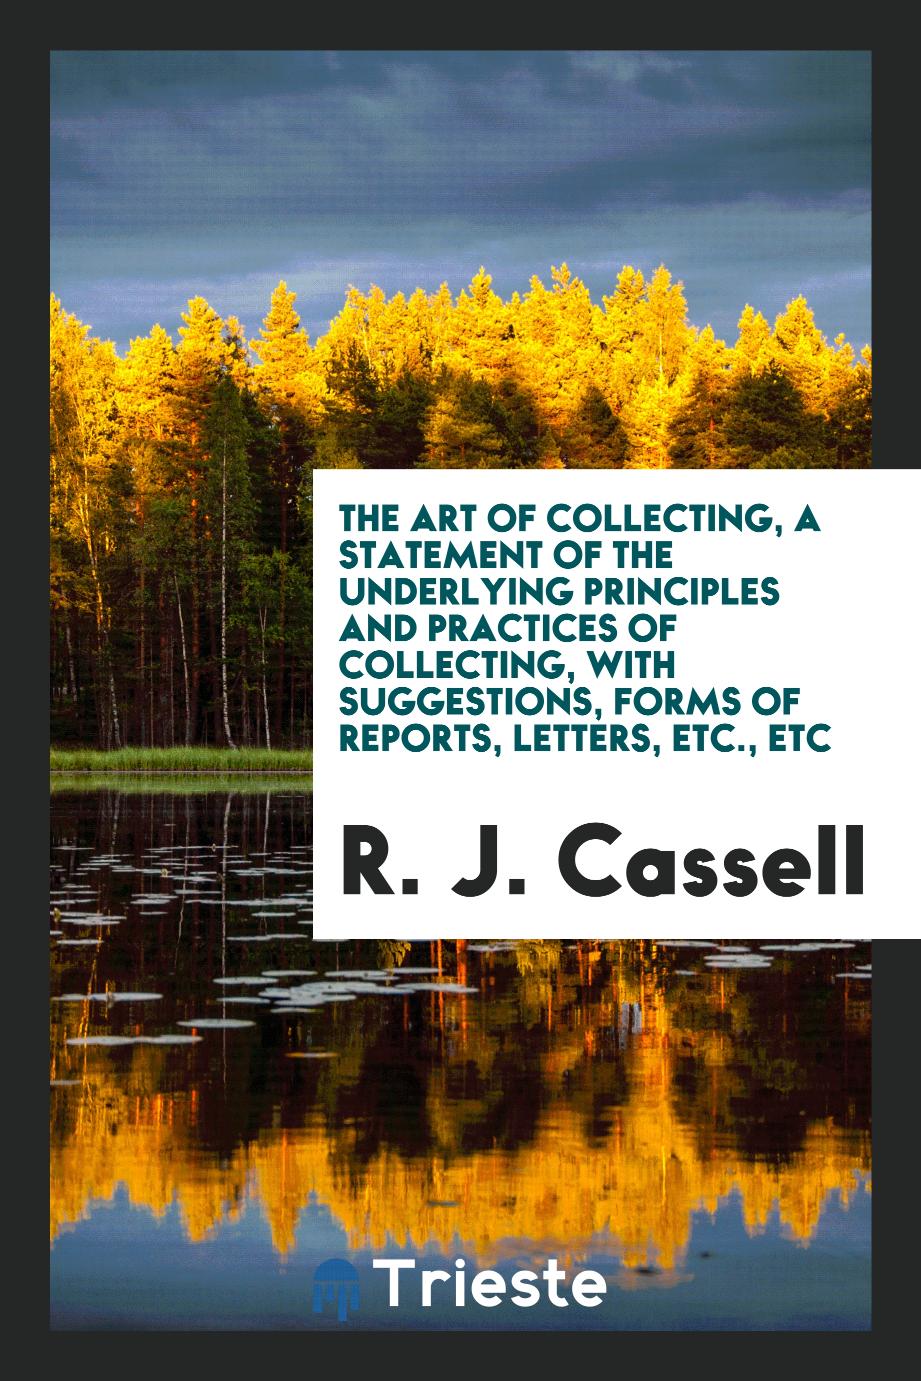 The Art of Collecting, a Statement of the Underlying Principles and Practices of Collecting, with Suggestions, Forms of Reports, Letters, Etc., Etc